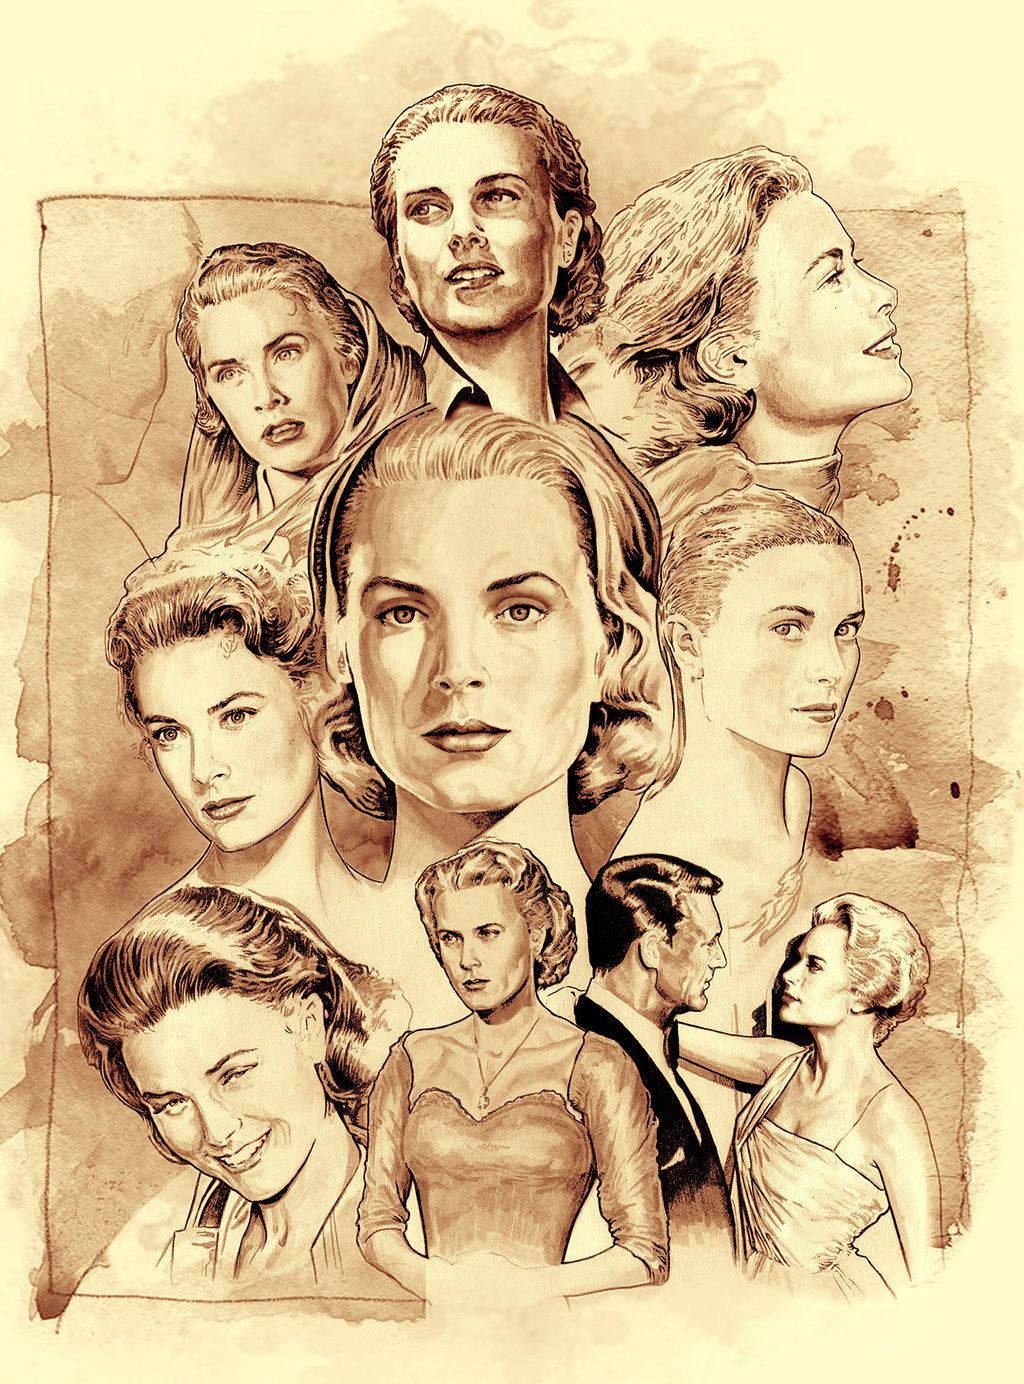 Elegance Personified - A Grace Kelly Art Collage Wallpaper